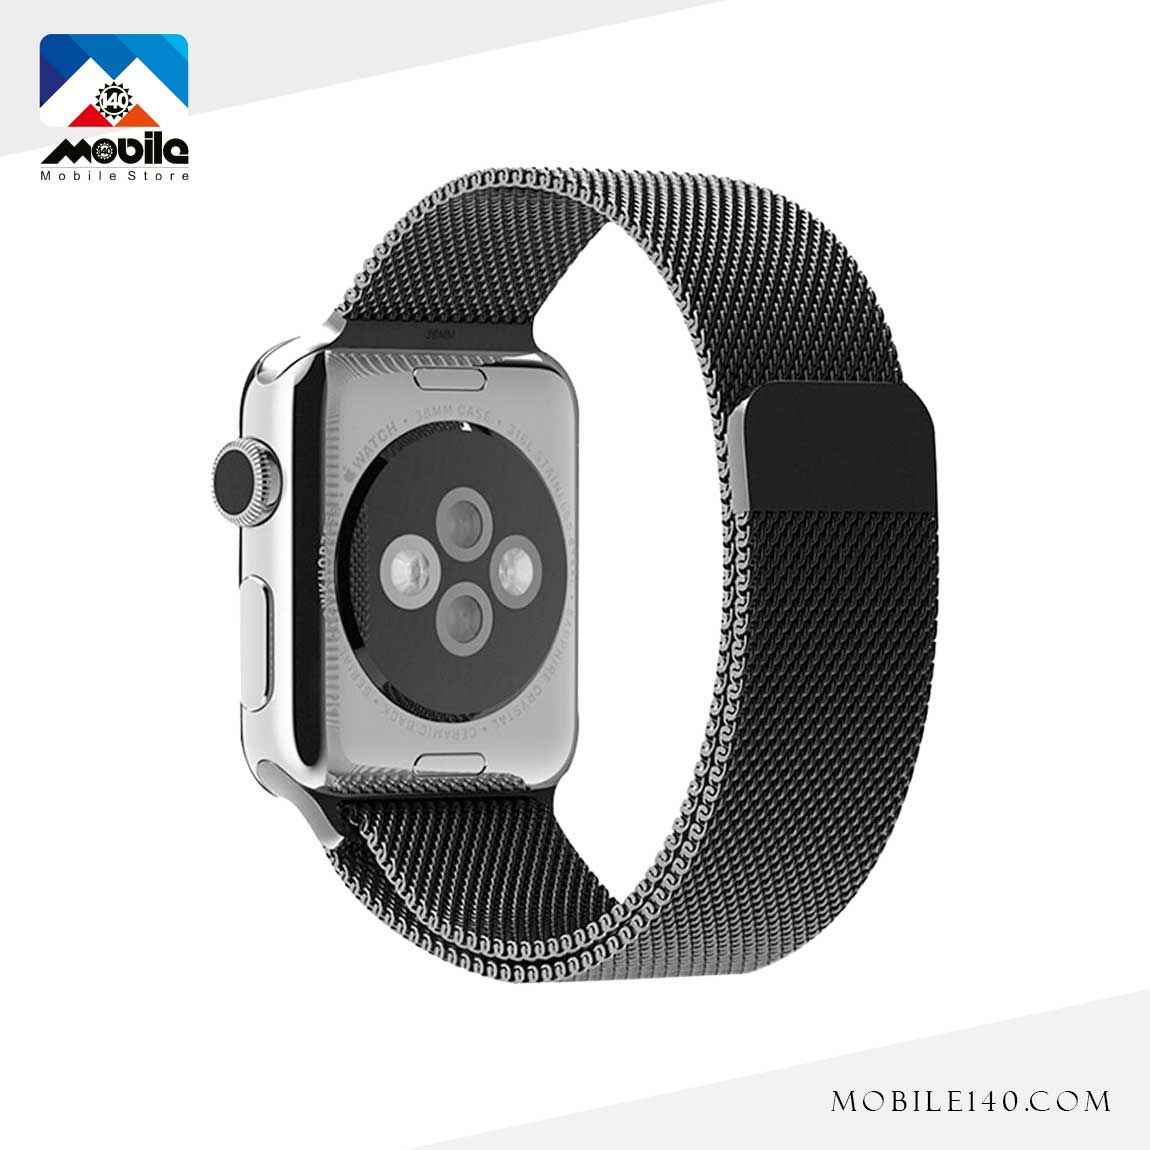 Apple Watch Series 4 Cellular 40mmStainless Steel Case with Milanese Loop 2